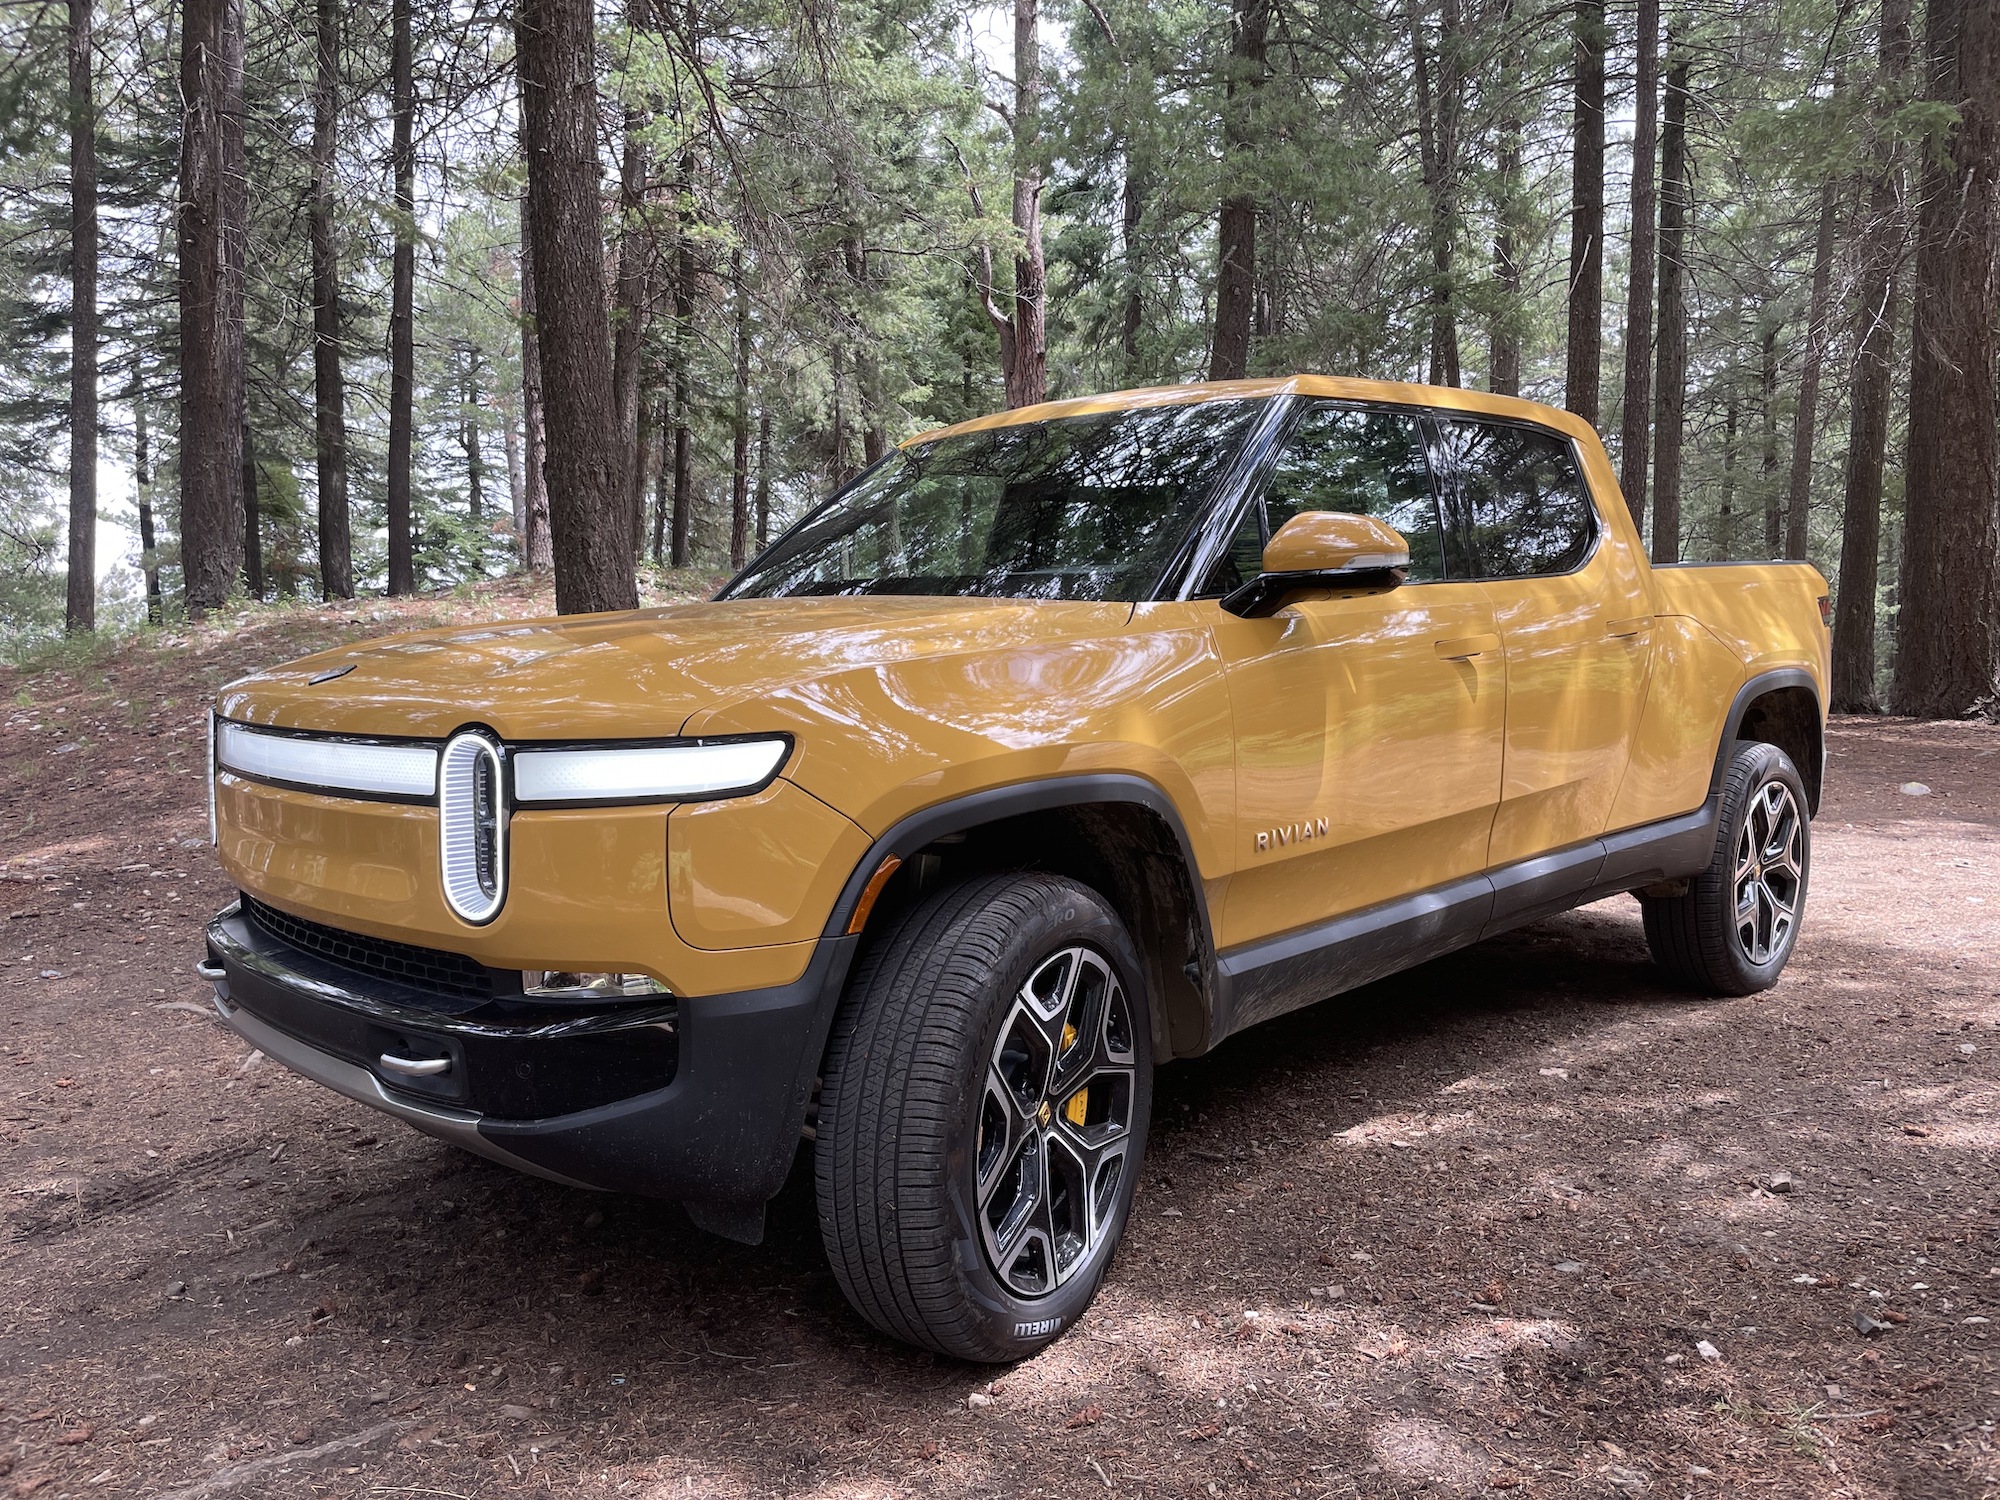 Front Suspension Rattle Reported by Many Rivian Vehicle Owners – Are There Any Solutions?